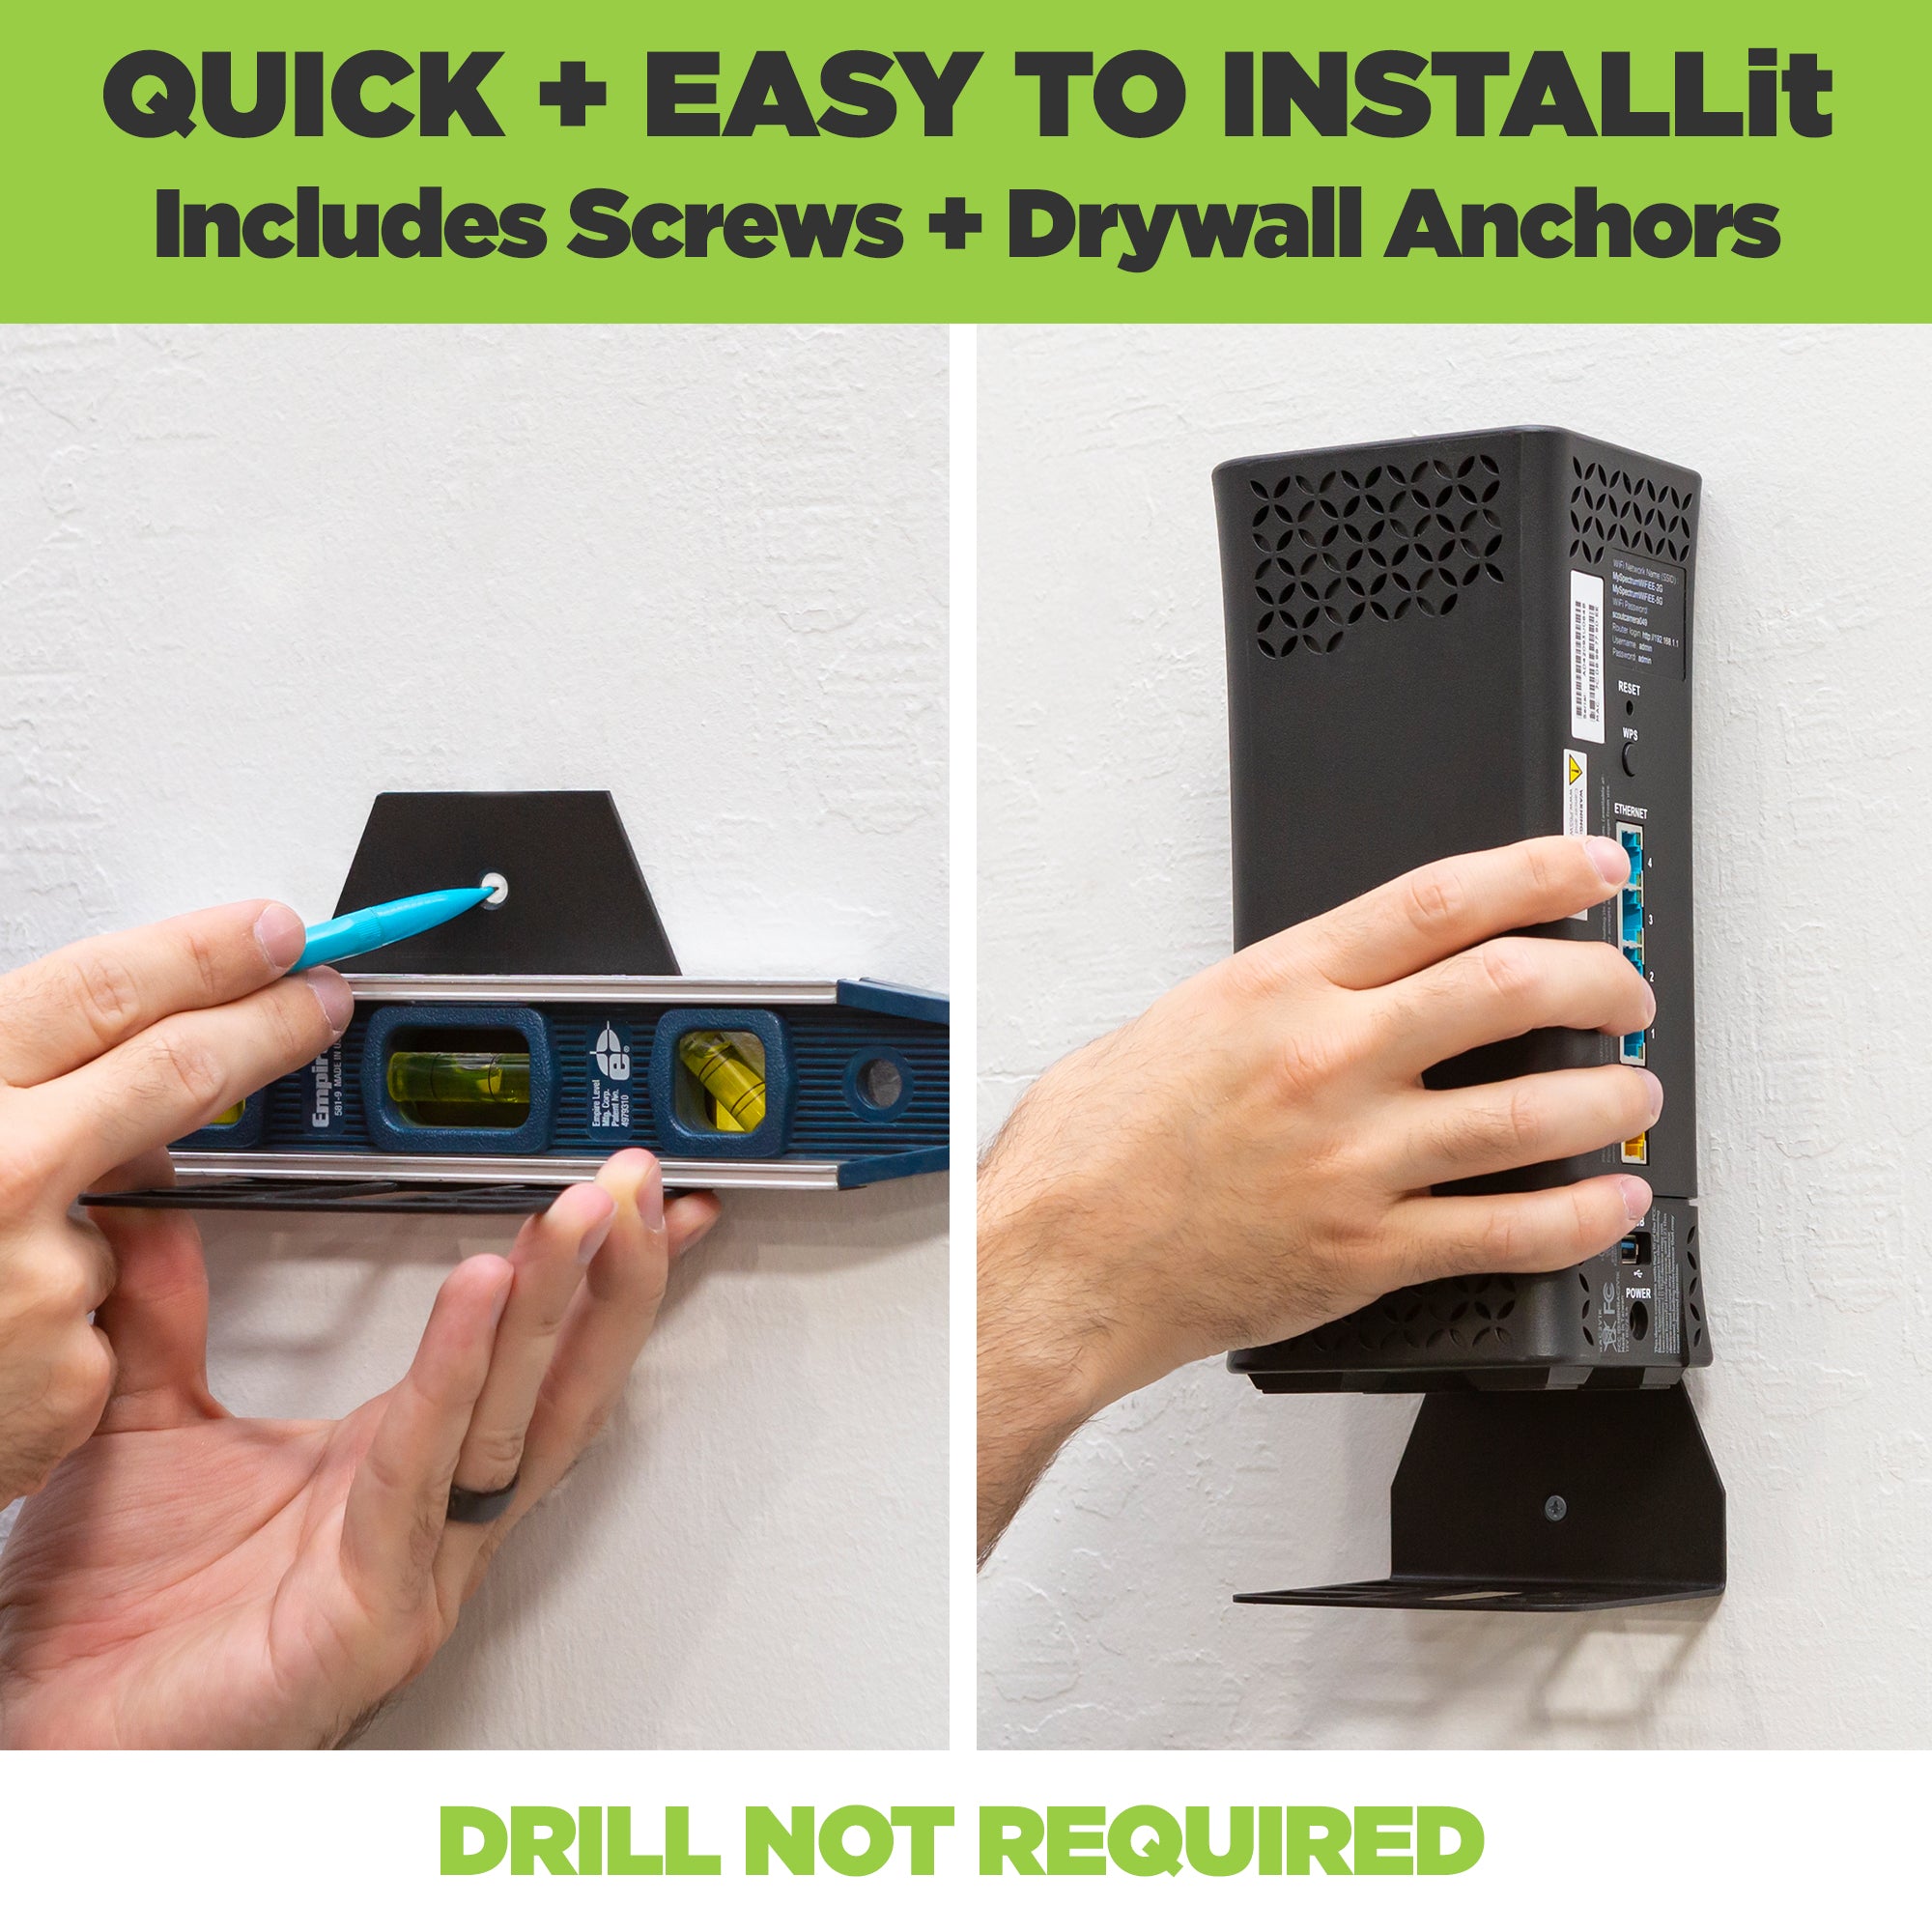 Easily install the HIDEit Wave 2 Spectrum Wave Wireless Gateway. Drill not required.